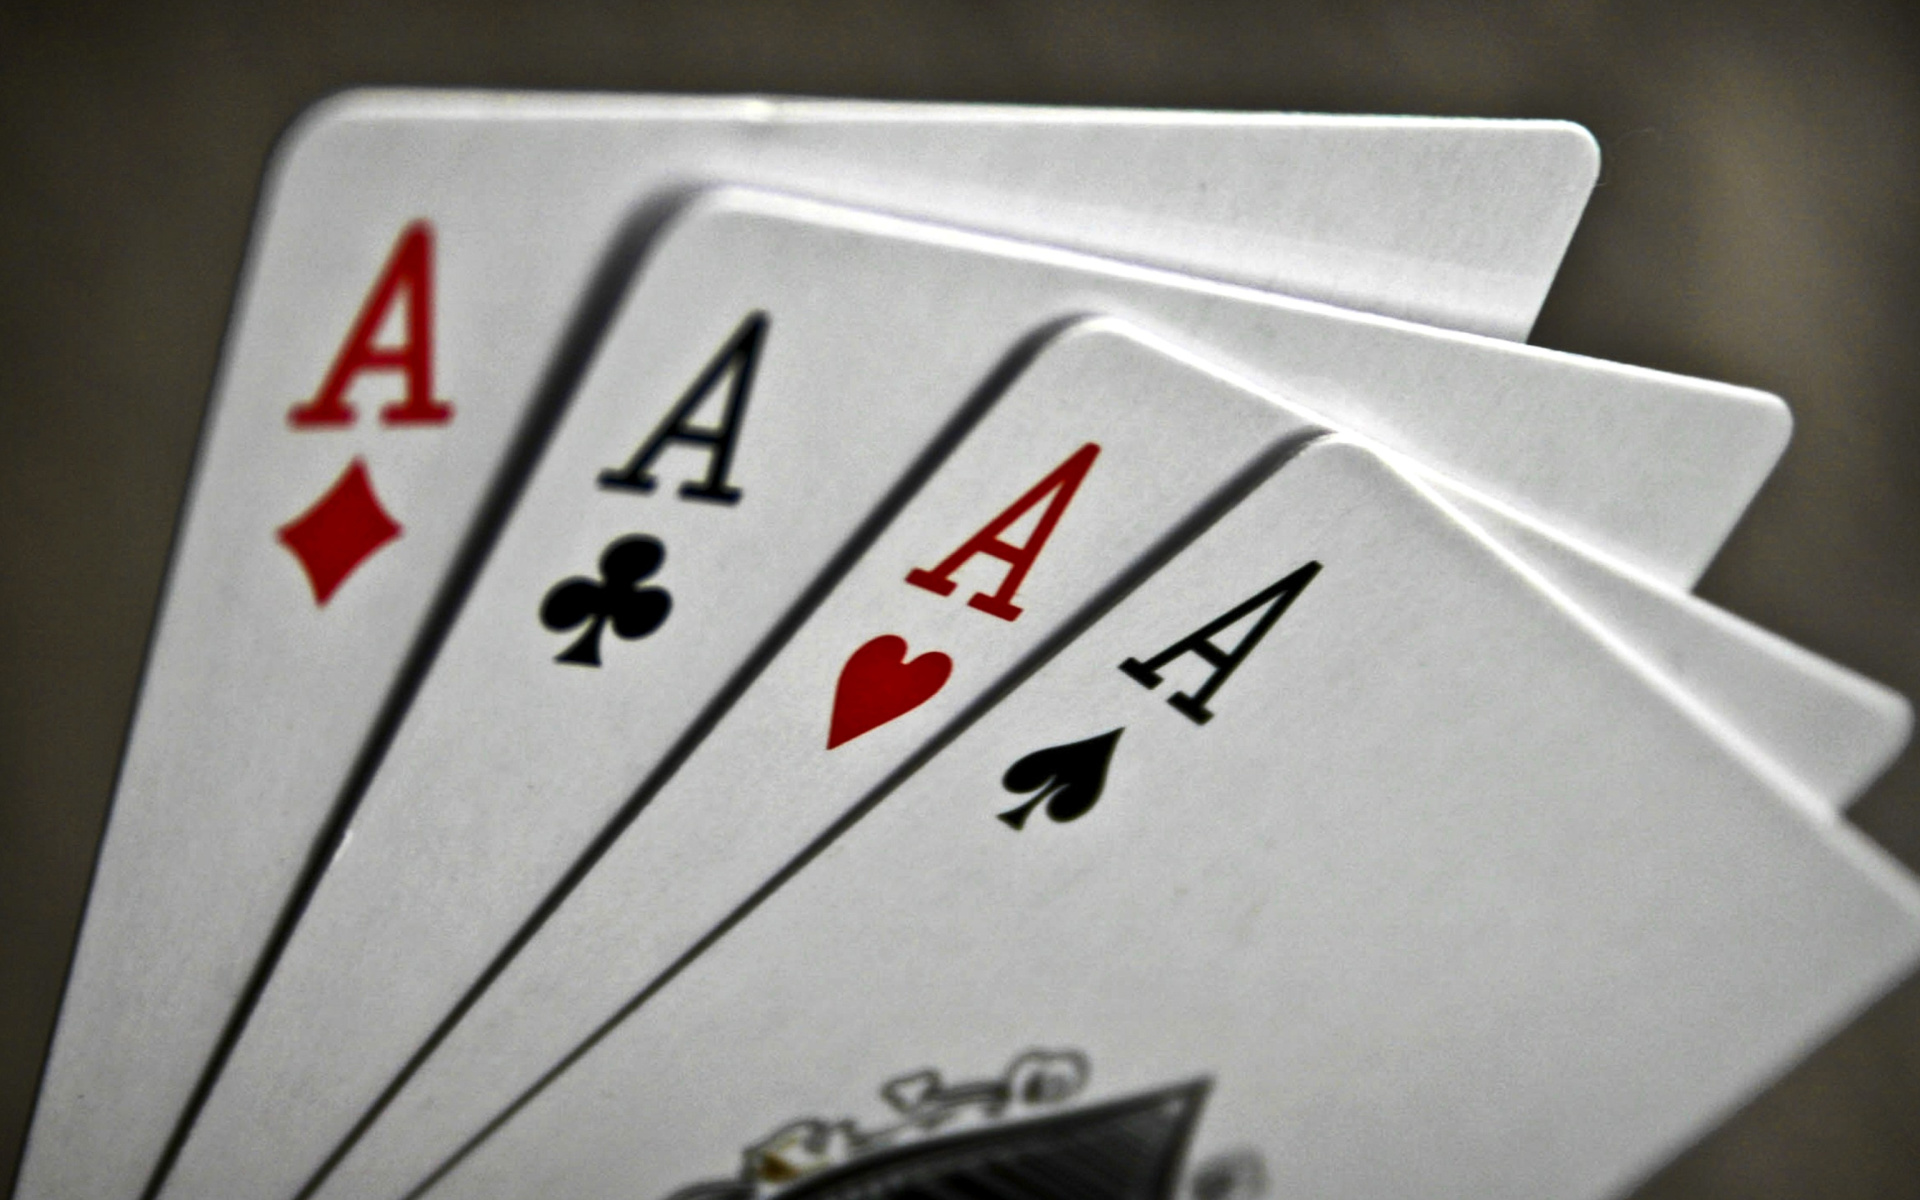 Das Deck of playing cards Wallpaper 1920x1200